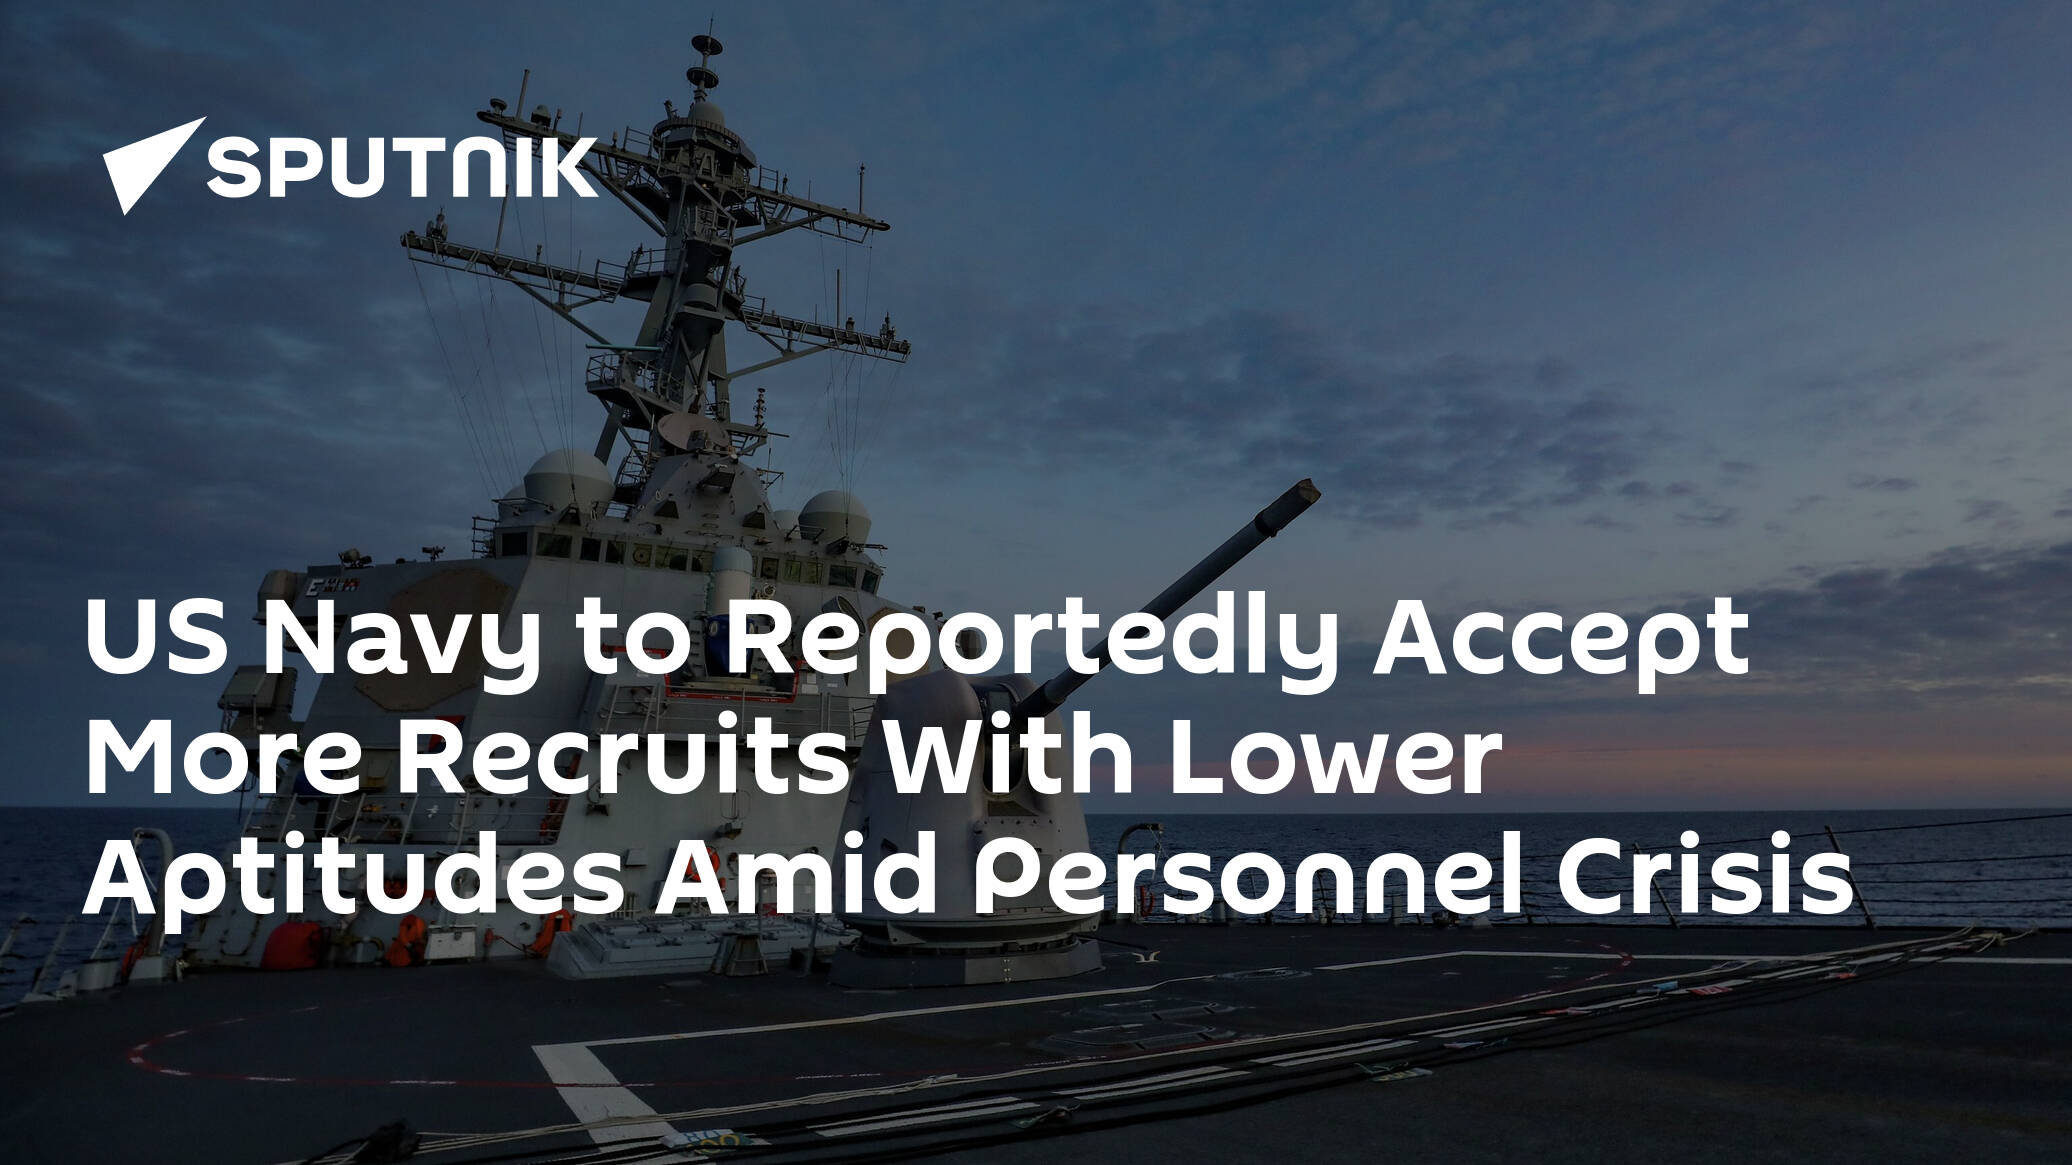 US Navy to Reportedly Accept More Recruits With Lower Aptitudes Amid Personnel Crisis